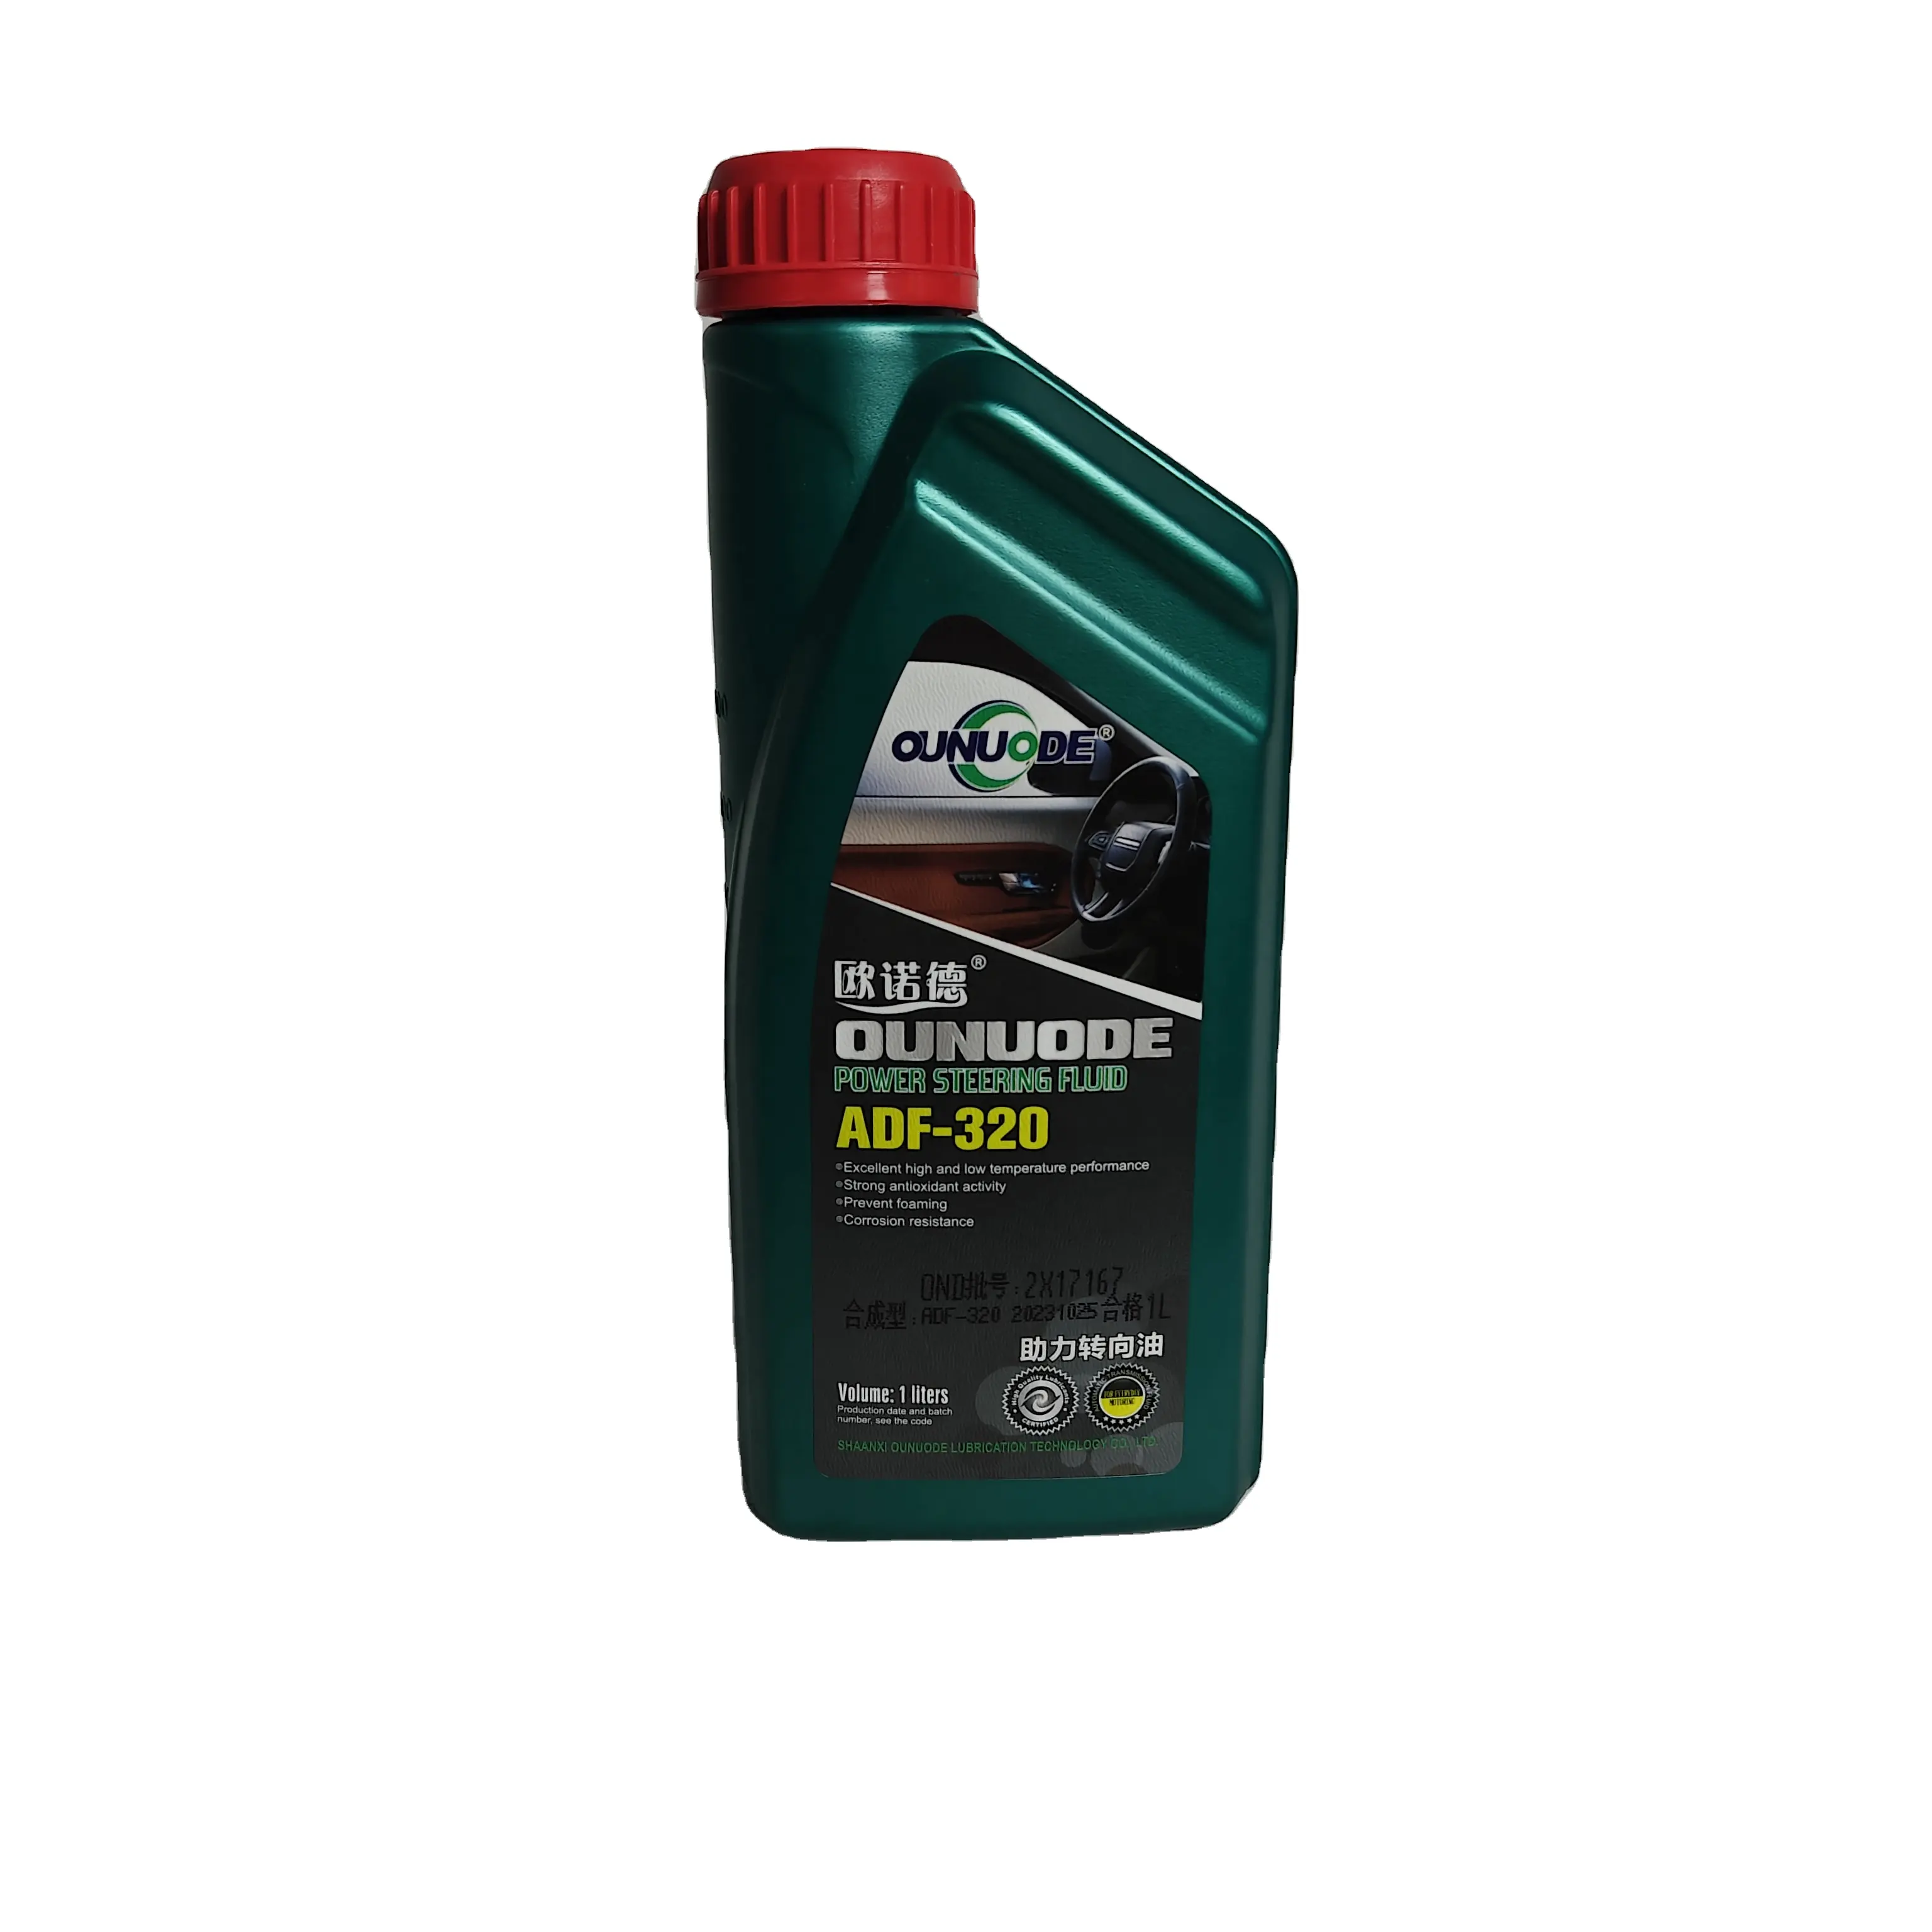 Synthetic automotive steering oil 320 is used to assist all automotive steering wheels.